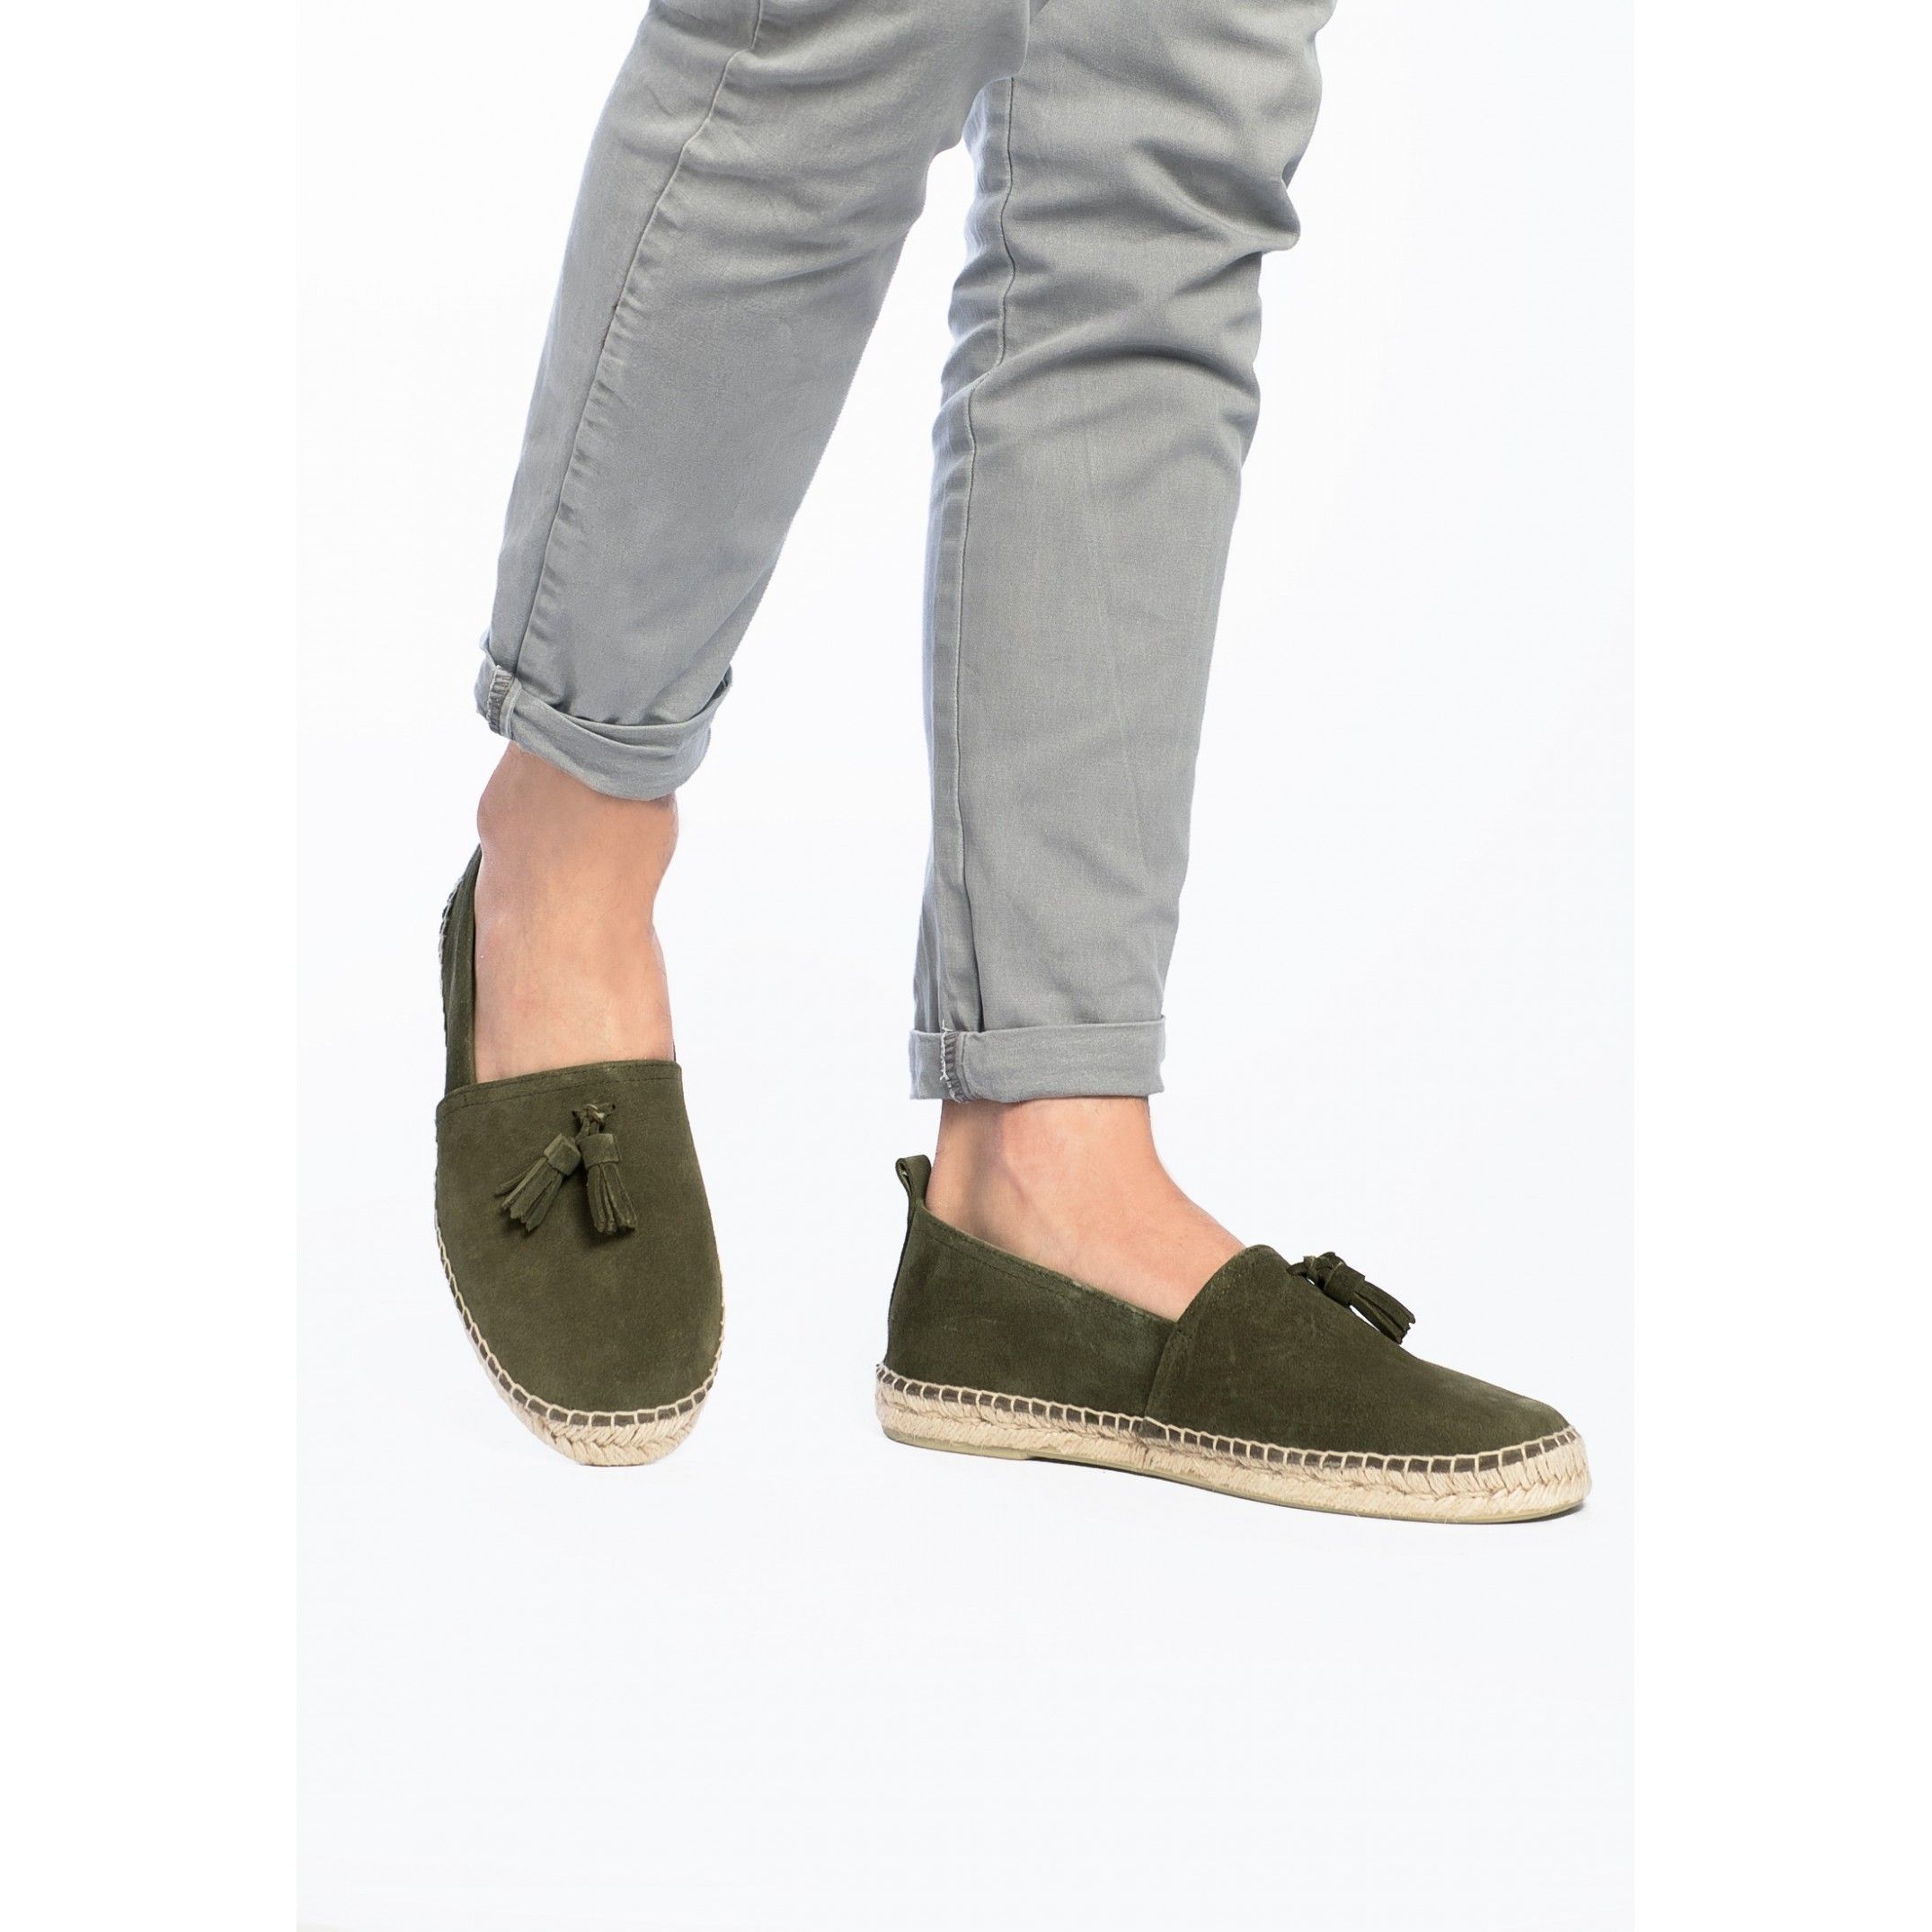 Split leather flat espadrilles with tassels, by Castellanisimos. Upper made of cowhide leather. Inner lining and insole: 25% cowhide leather and 75% of textile. Sole material: synthetic and non slip. Heel height: 2 cm. Designed and made in Spain.